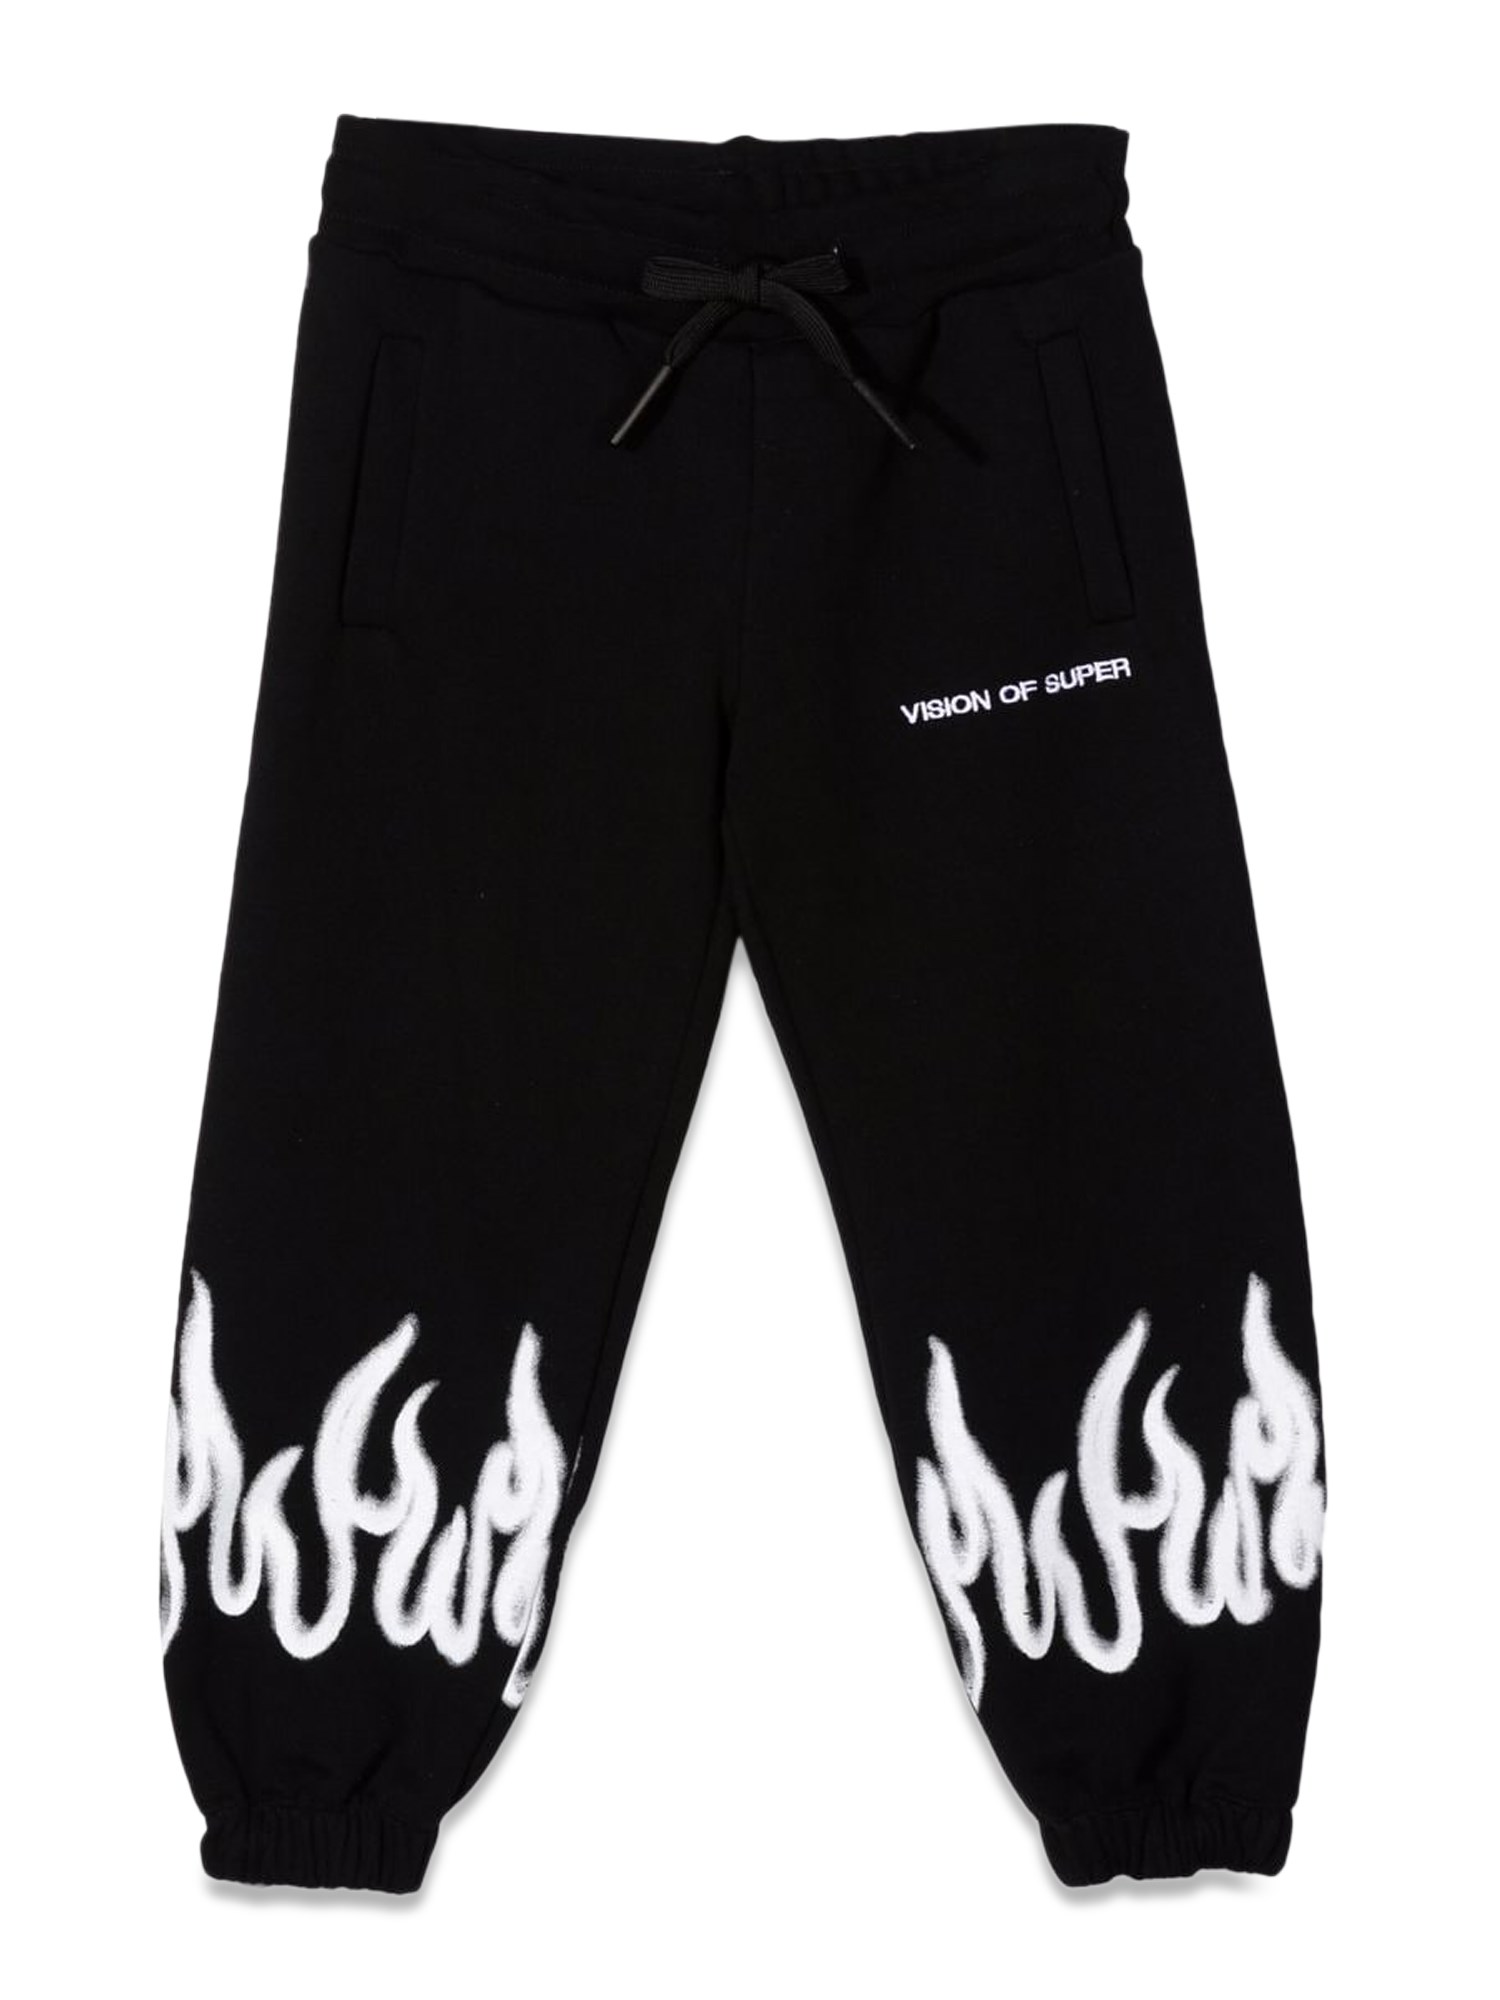 vision of super black pants kids with white spray flames